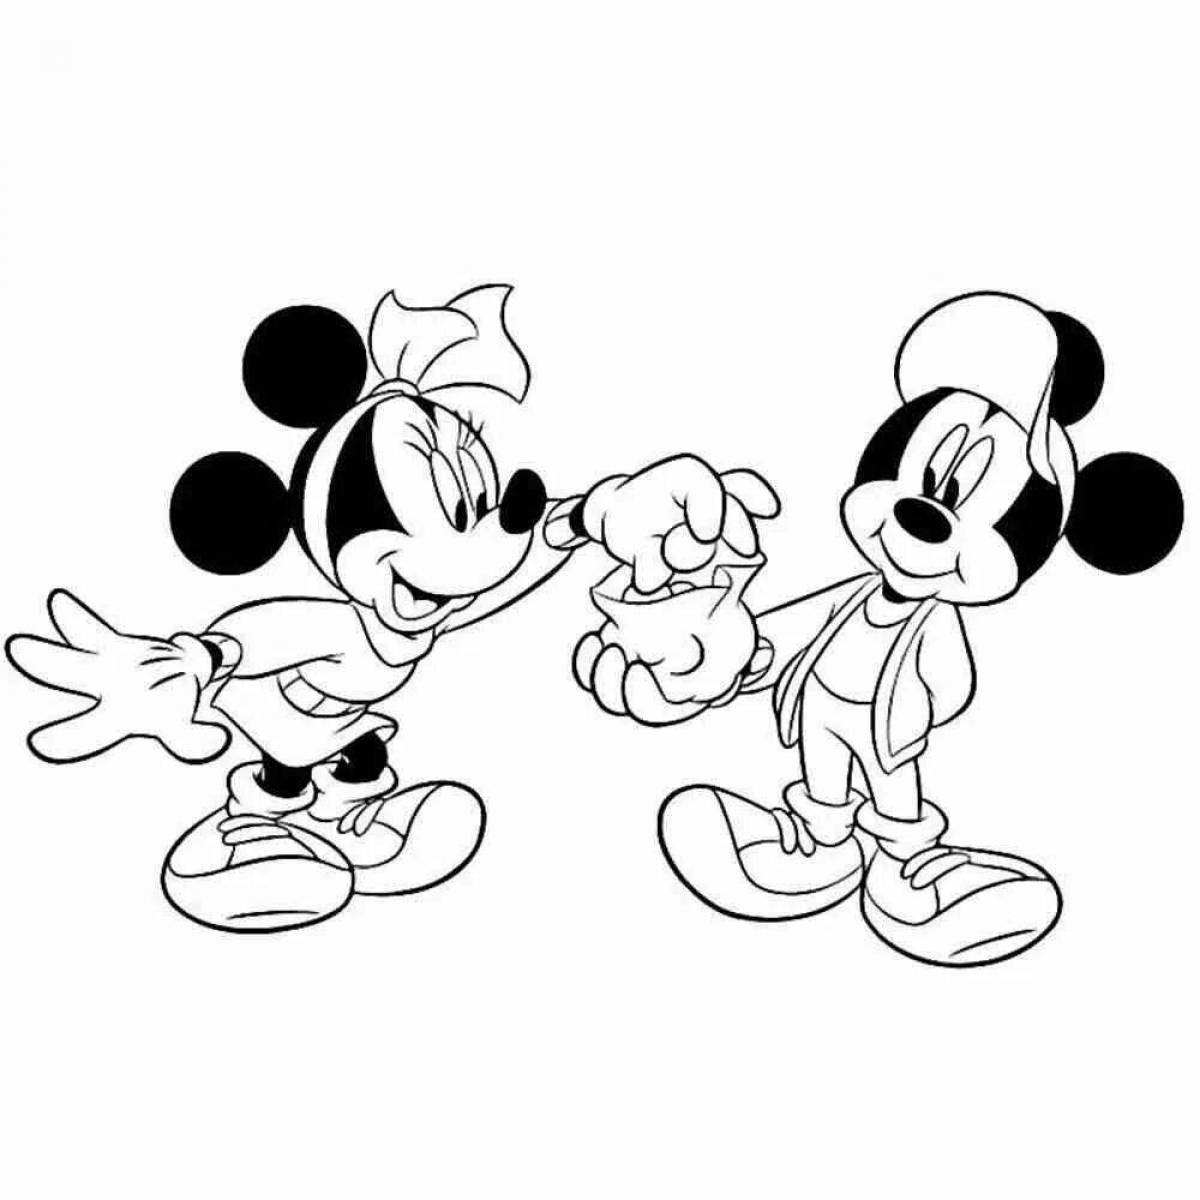 Mickey mouse for kids #2